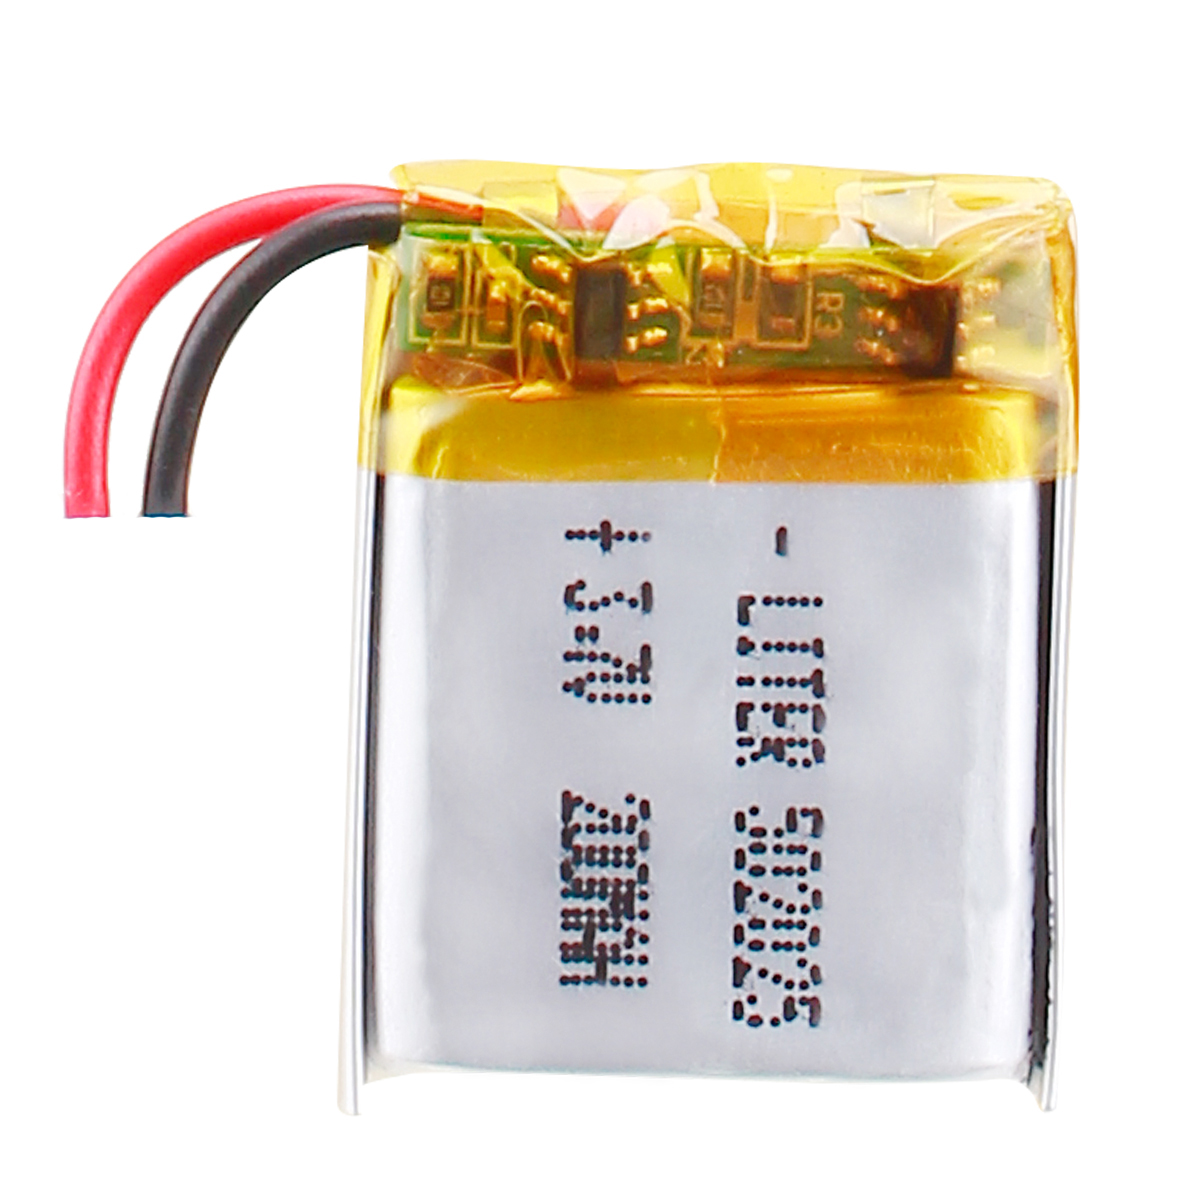 502025 210mAh 3.7V Rechargeable LiPo Battery Batteries with connector JST SHR-02V-S-B A